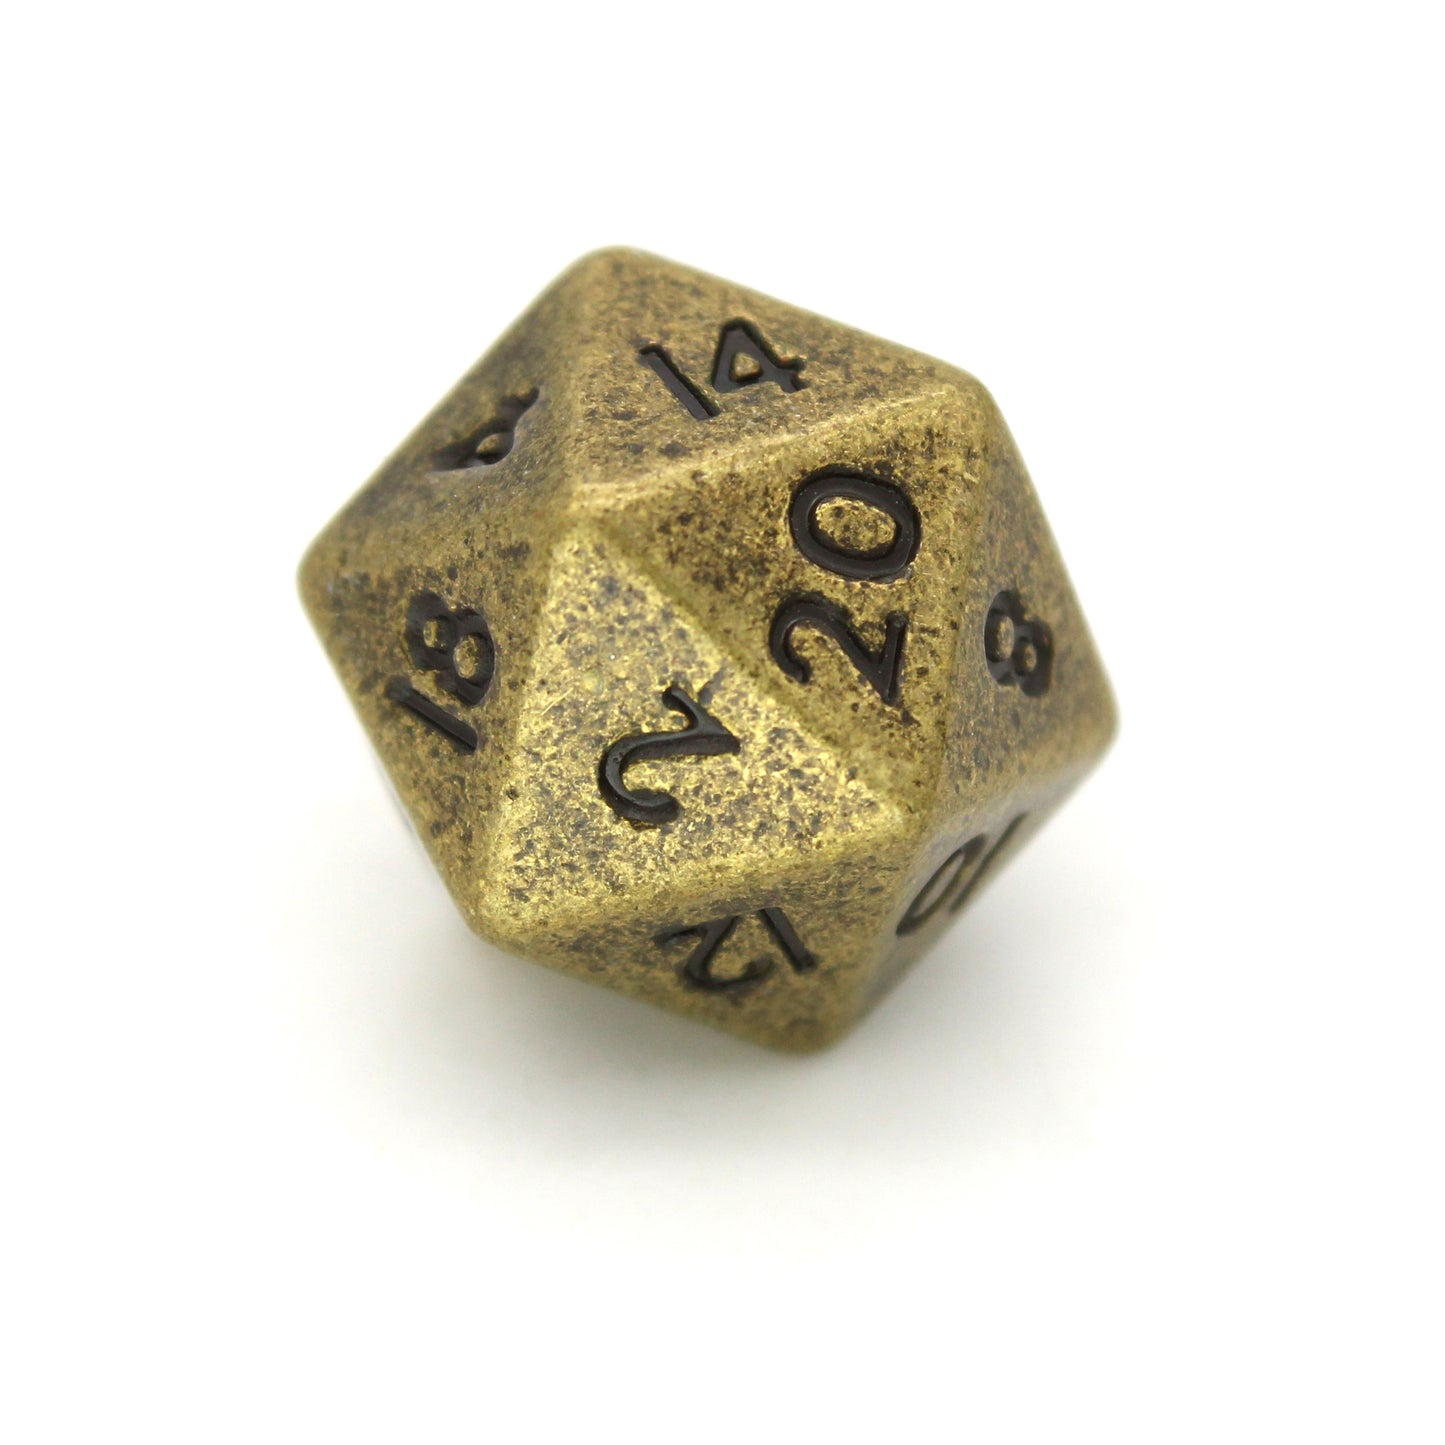 Peanuts is a 7-piece set of ancient gold colored 10mm metal dice.